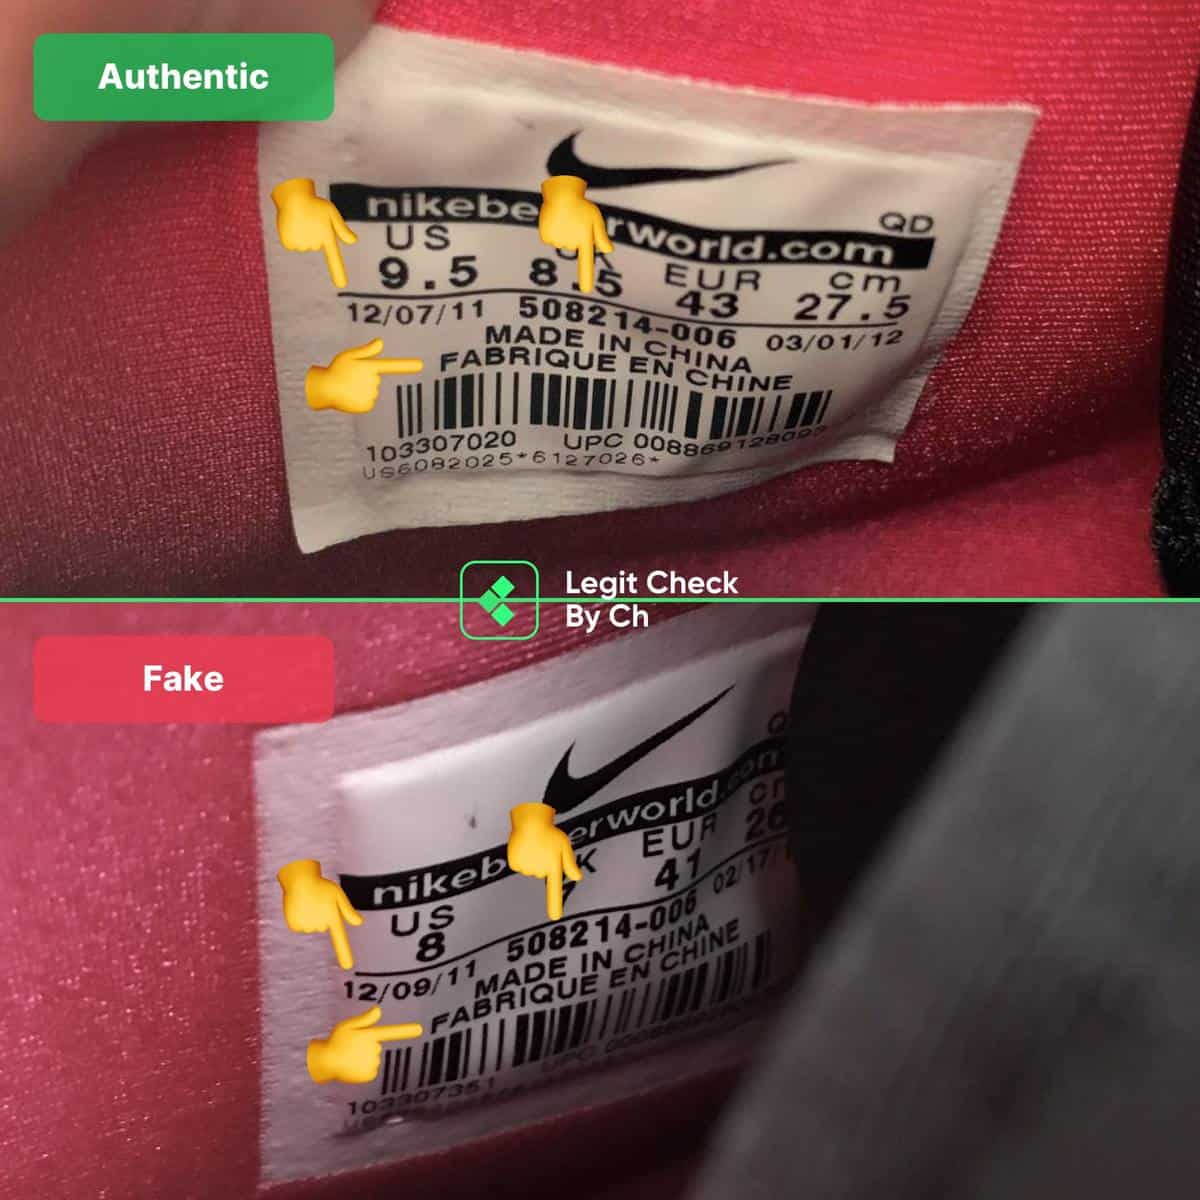 Legit check and authenticate supreme, yeezy, jordan, nike by Shawnerb007